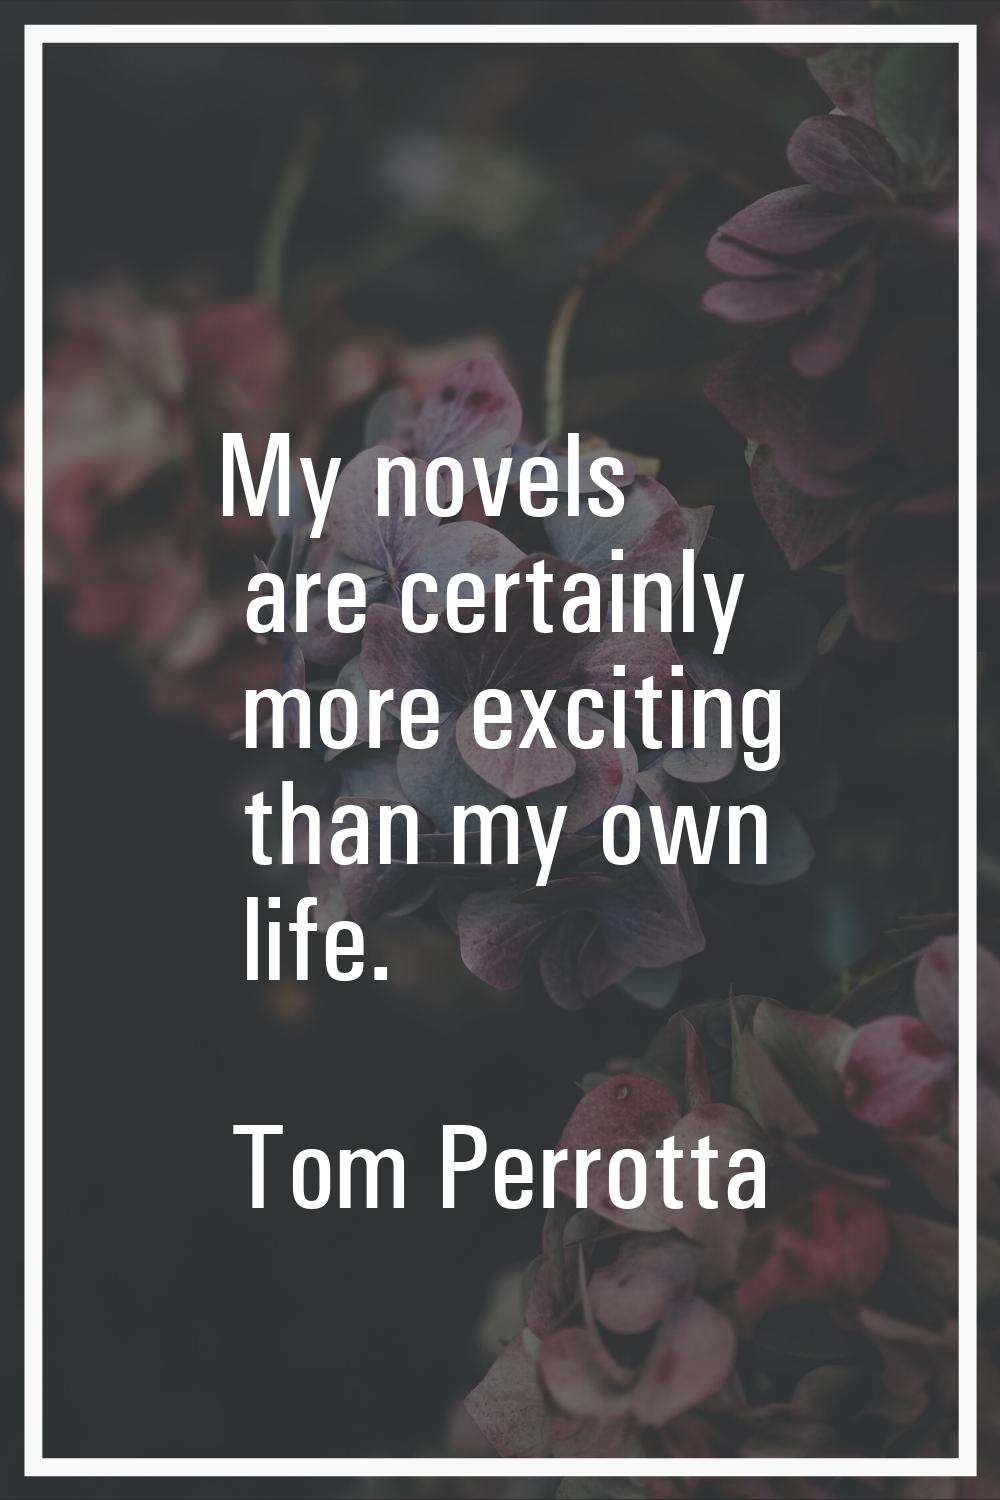 My novels are certainly more exciting than my own life.